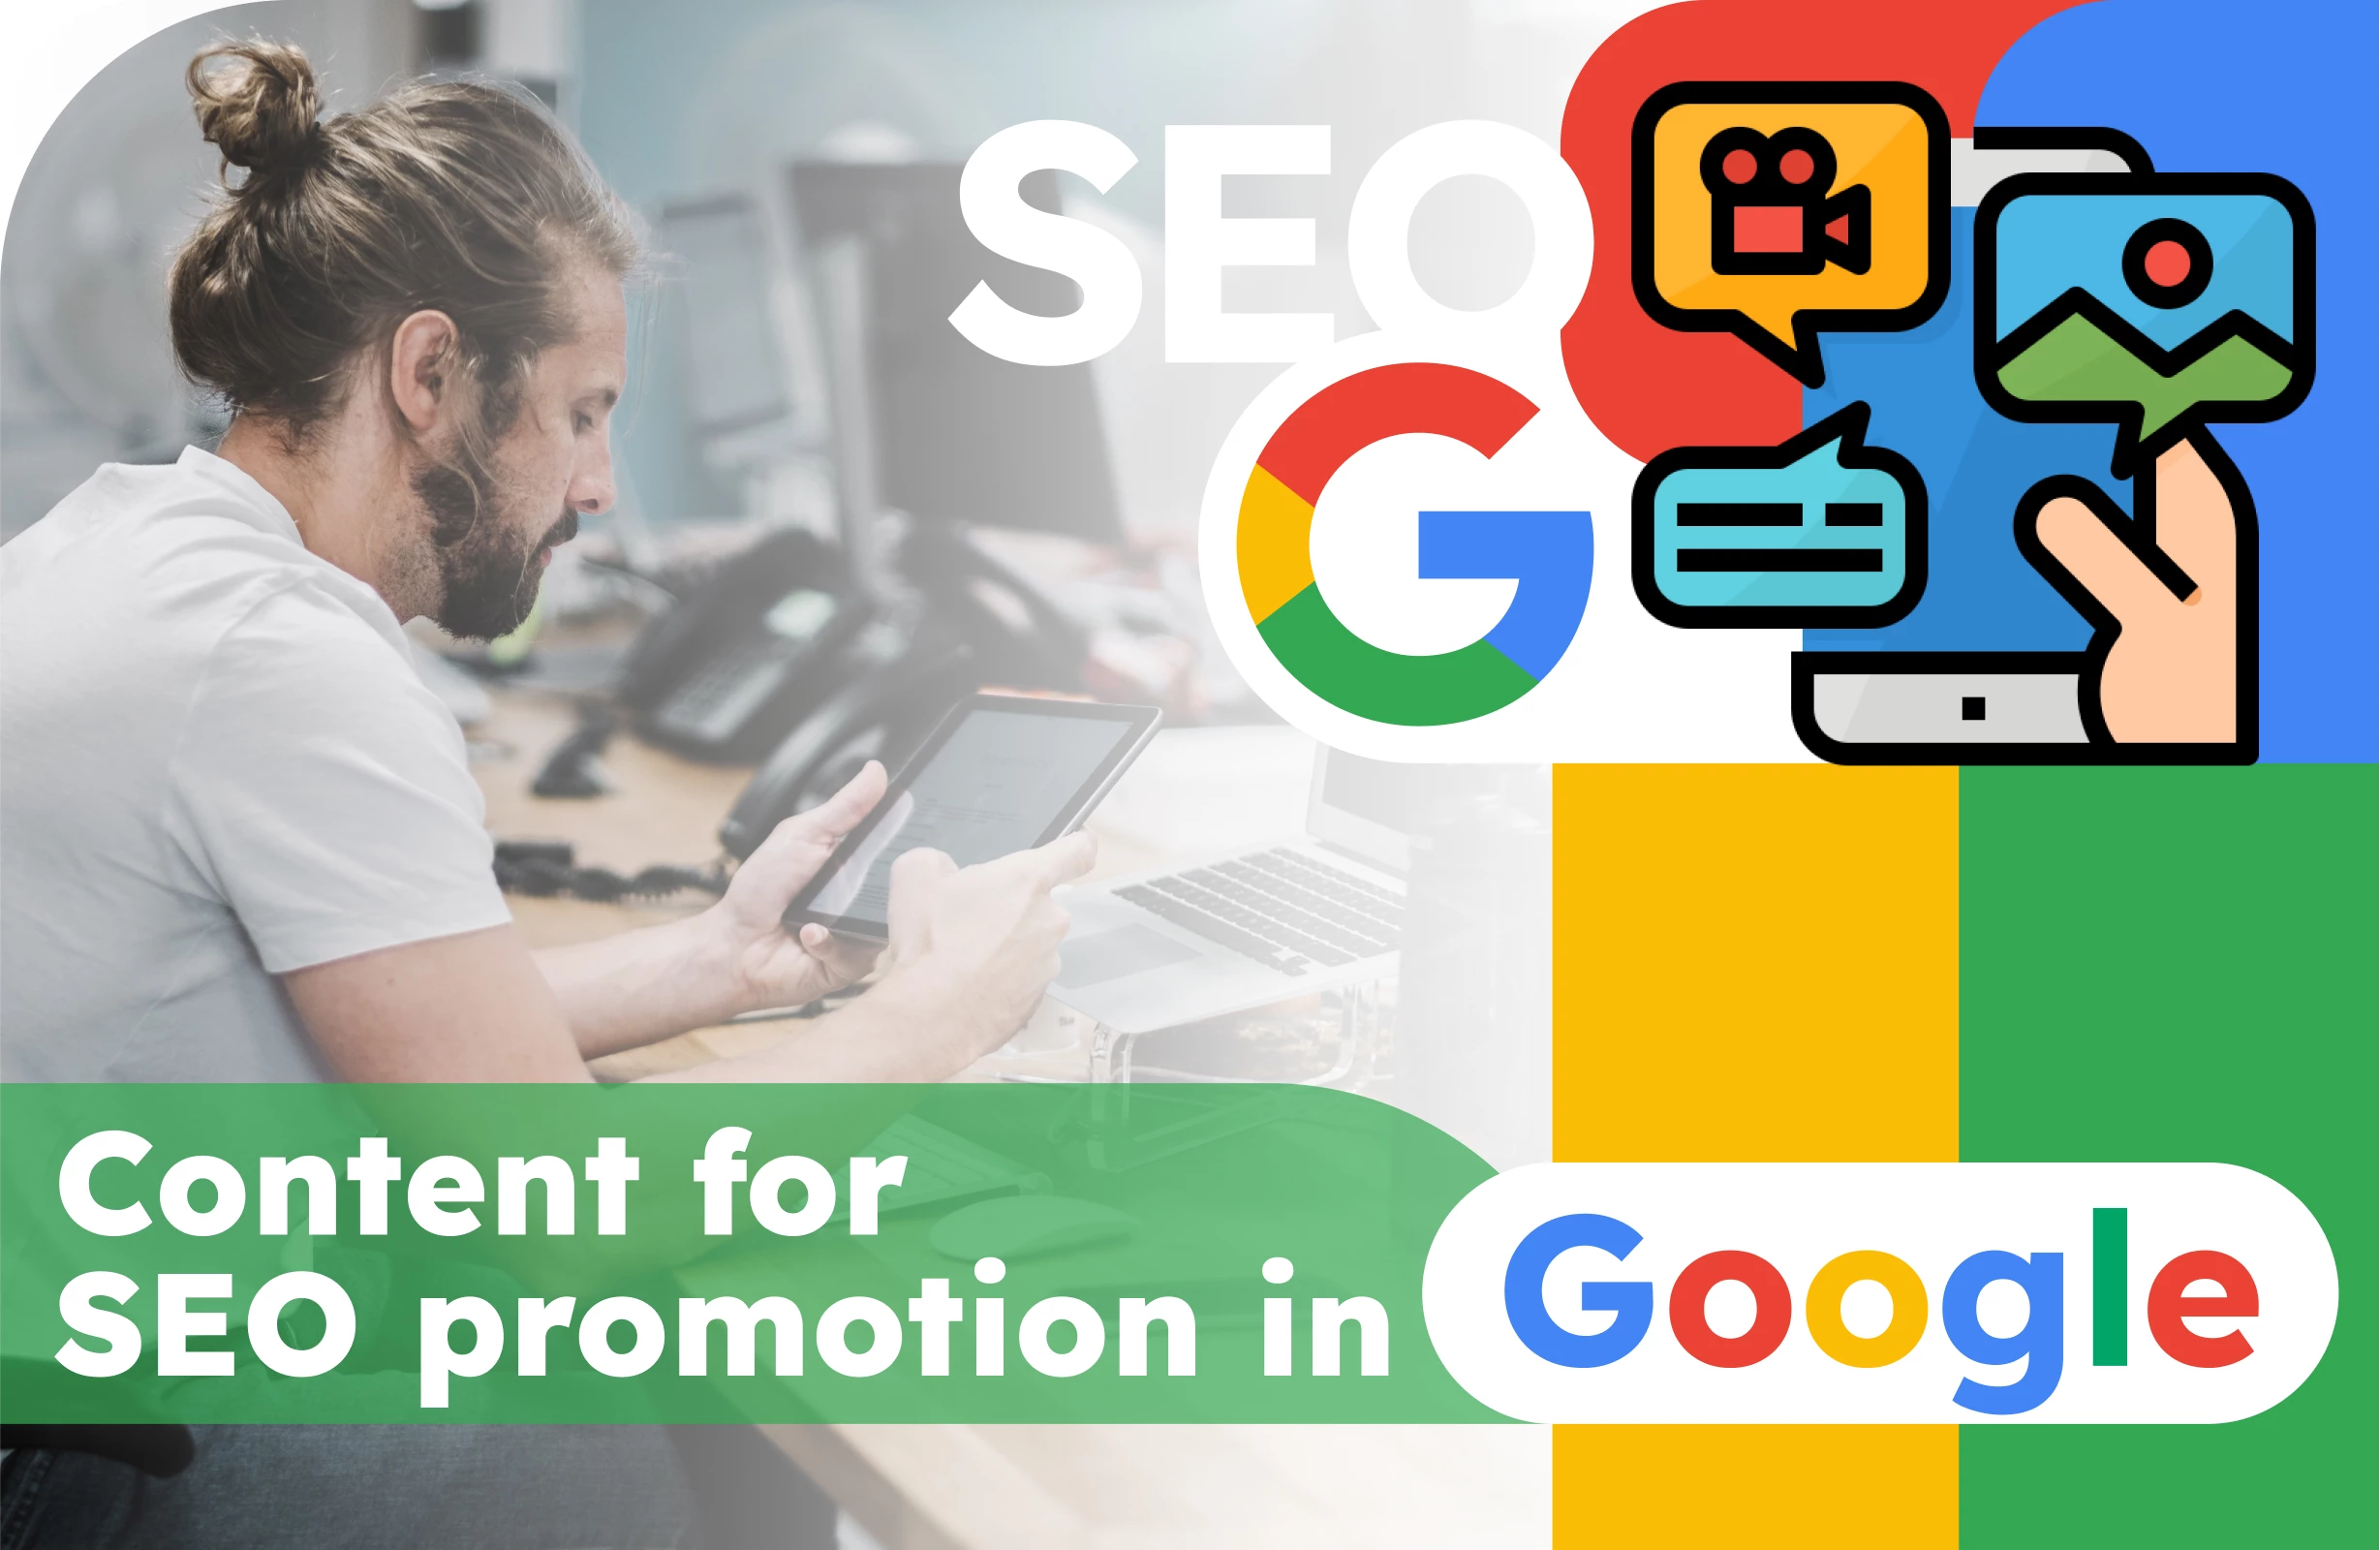 Content for SEO promotion in Google